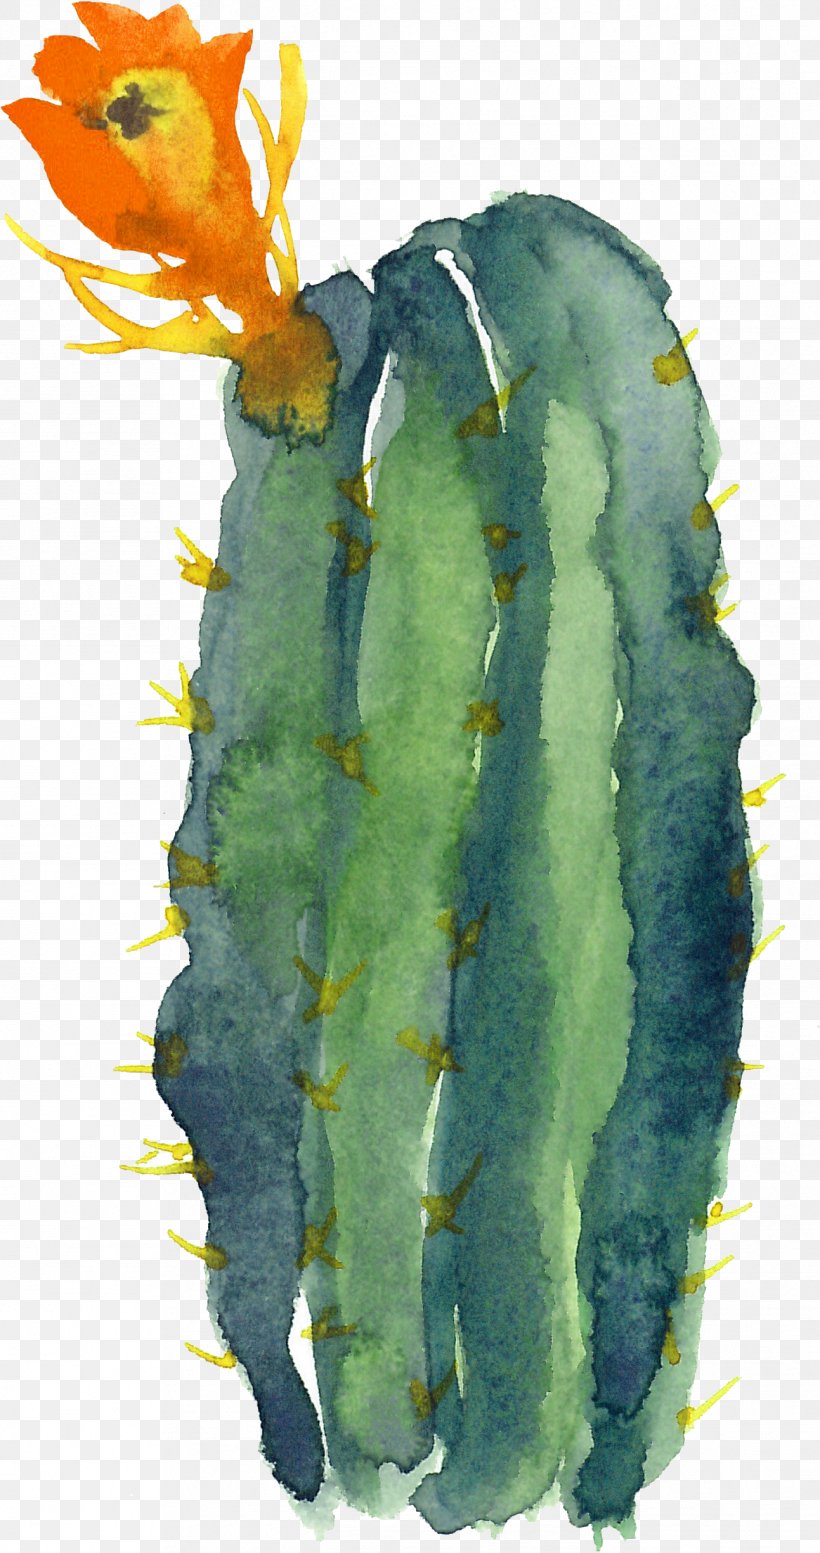 Cactaceae Modern Watercolor: A Playful And Contemporary Exploration Of Watercolor Painting, PNG, 1293x2450px, Cactaceae, Birthday, Birthday Card, Cactus, Canvas Print Download Free